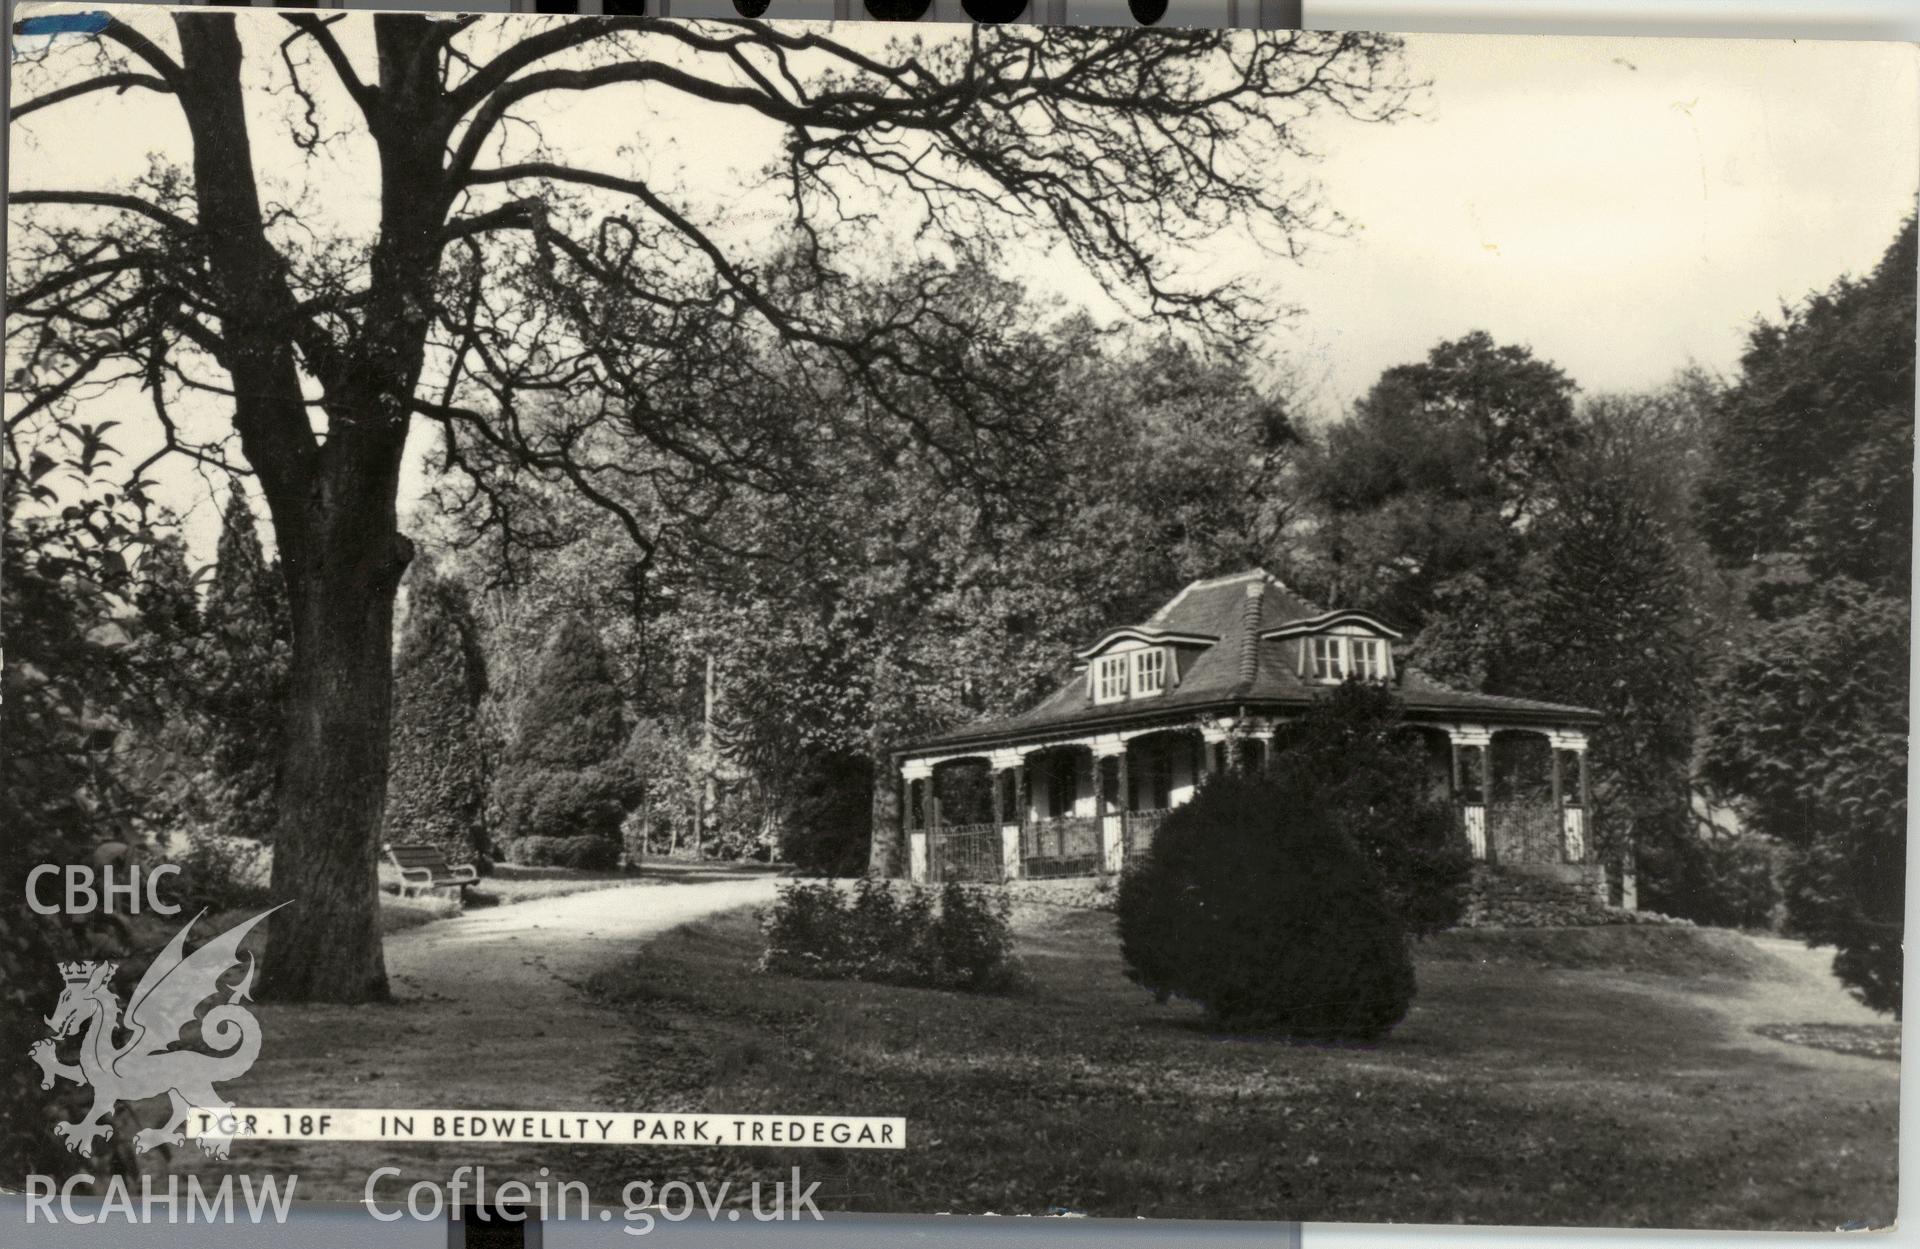 Digitised postcard image of garden pavilion in Bedwellty Patk, F. Frith & Co. Ltd. Produced by Parks and Gardens Data Services, from an original item in the Peter Davis Collection at Parks and Gardens UK. We hold only web-resolution images of this collection, suitable for viewing on screen and for research purposes only. We do not hold the original images, or publication quality scans.